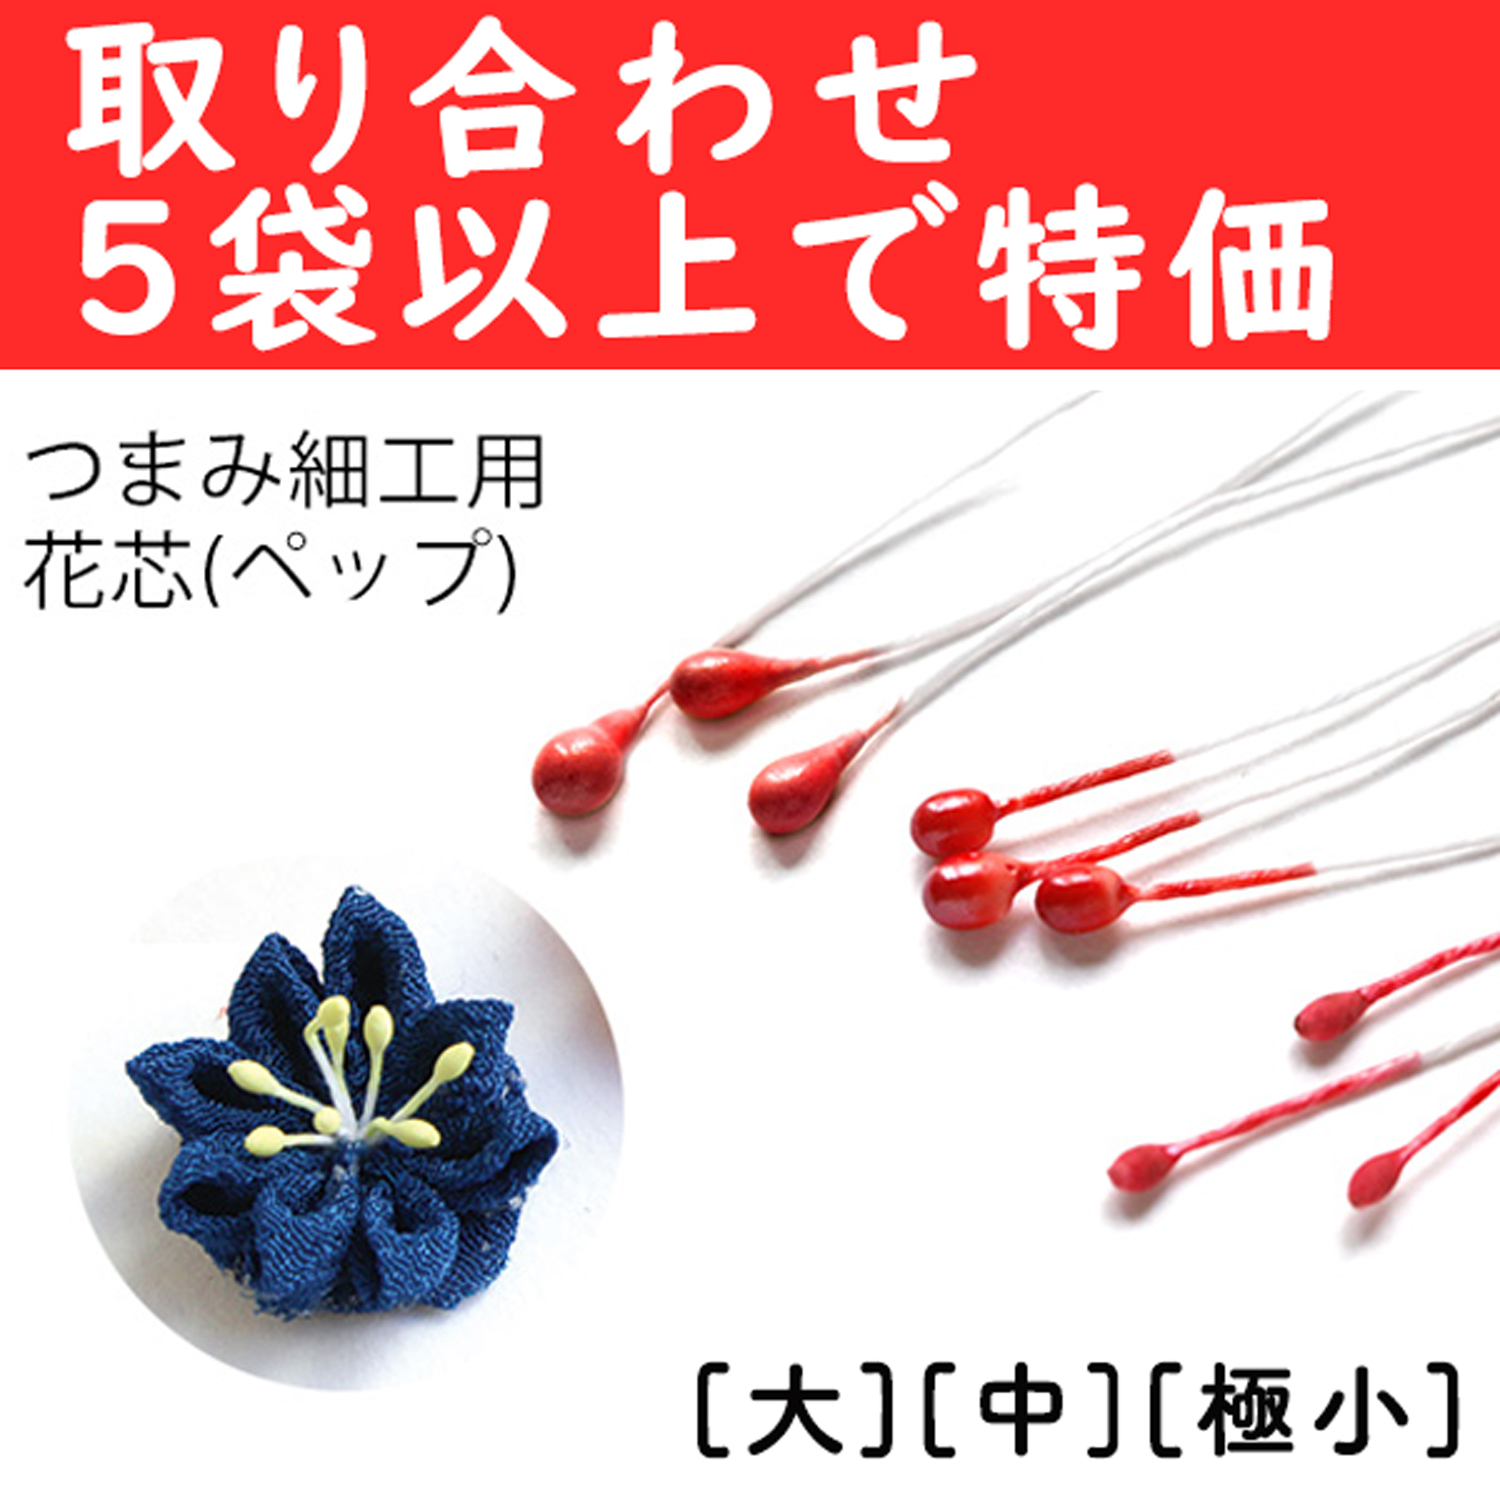 S54-OVER5 Tsumami/Kanzashi Flower Small Stamen Length approx. 4.5cm for 5 or more packs of any color (pack)